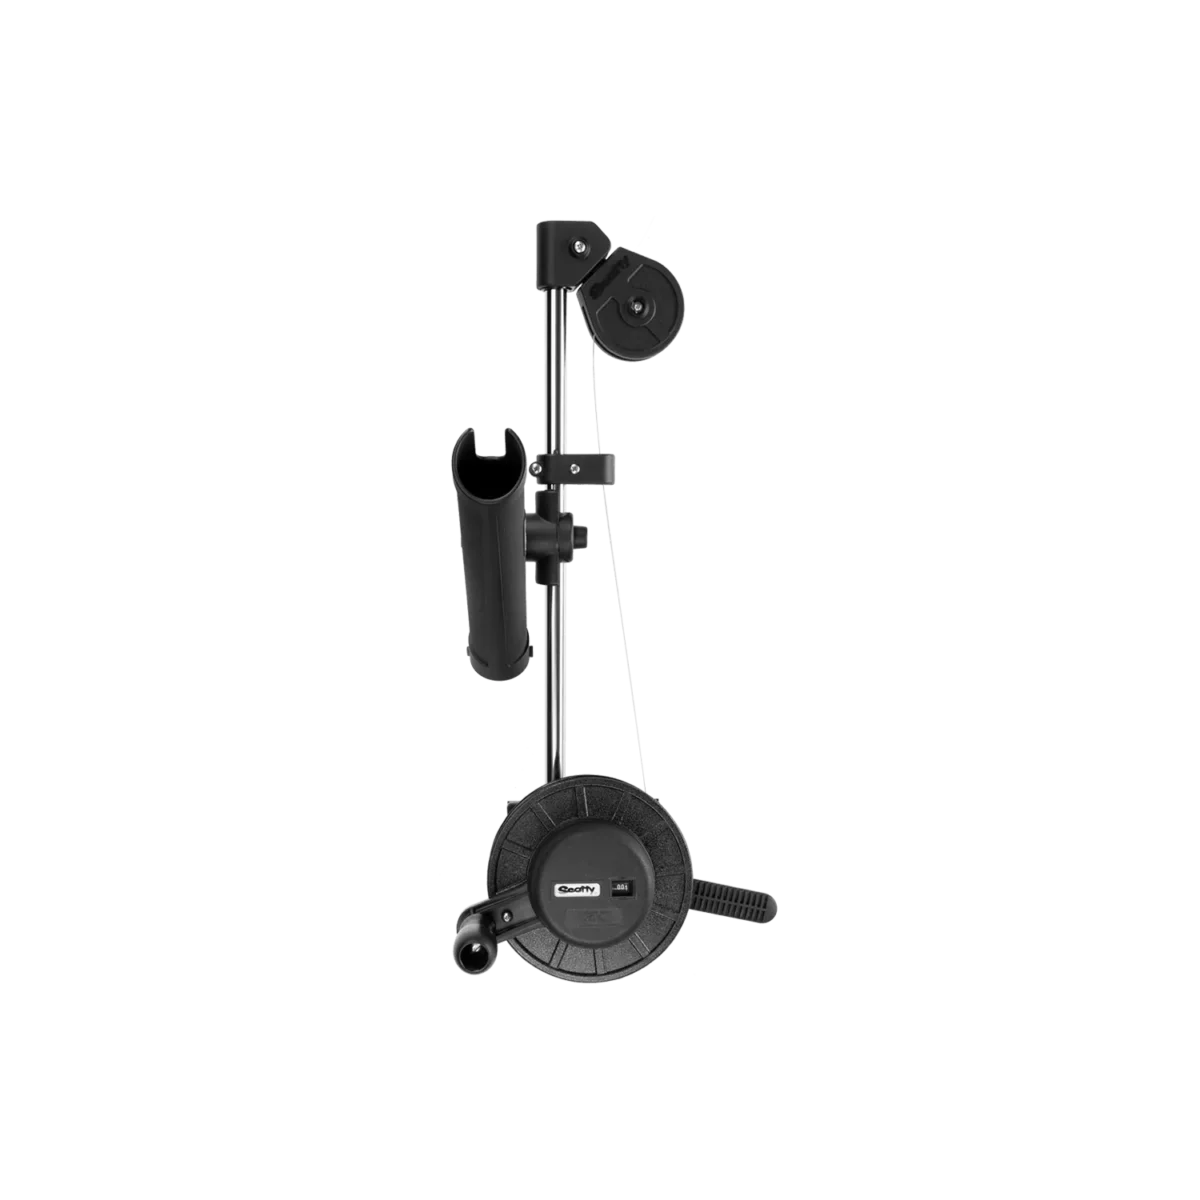 Scotty 1050-MP compact manual downrigger top view